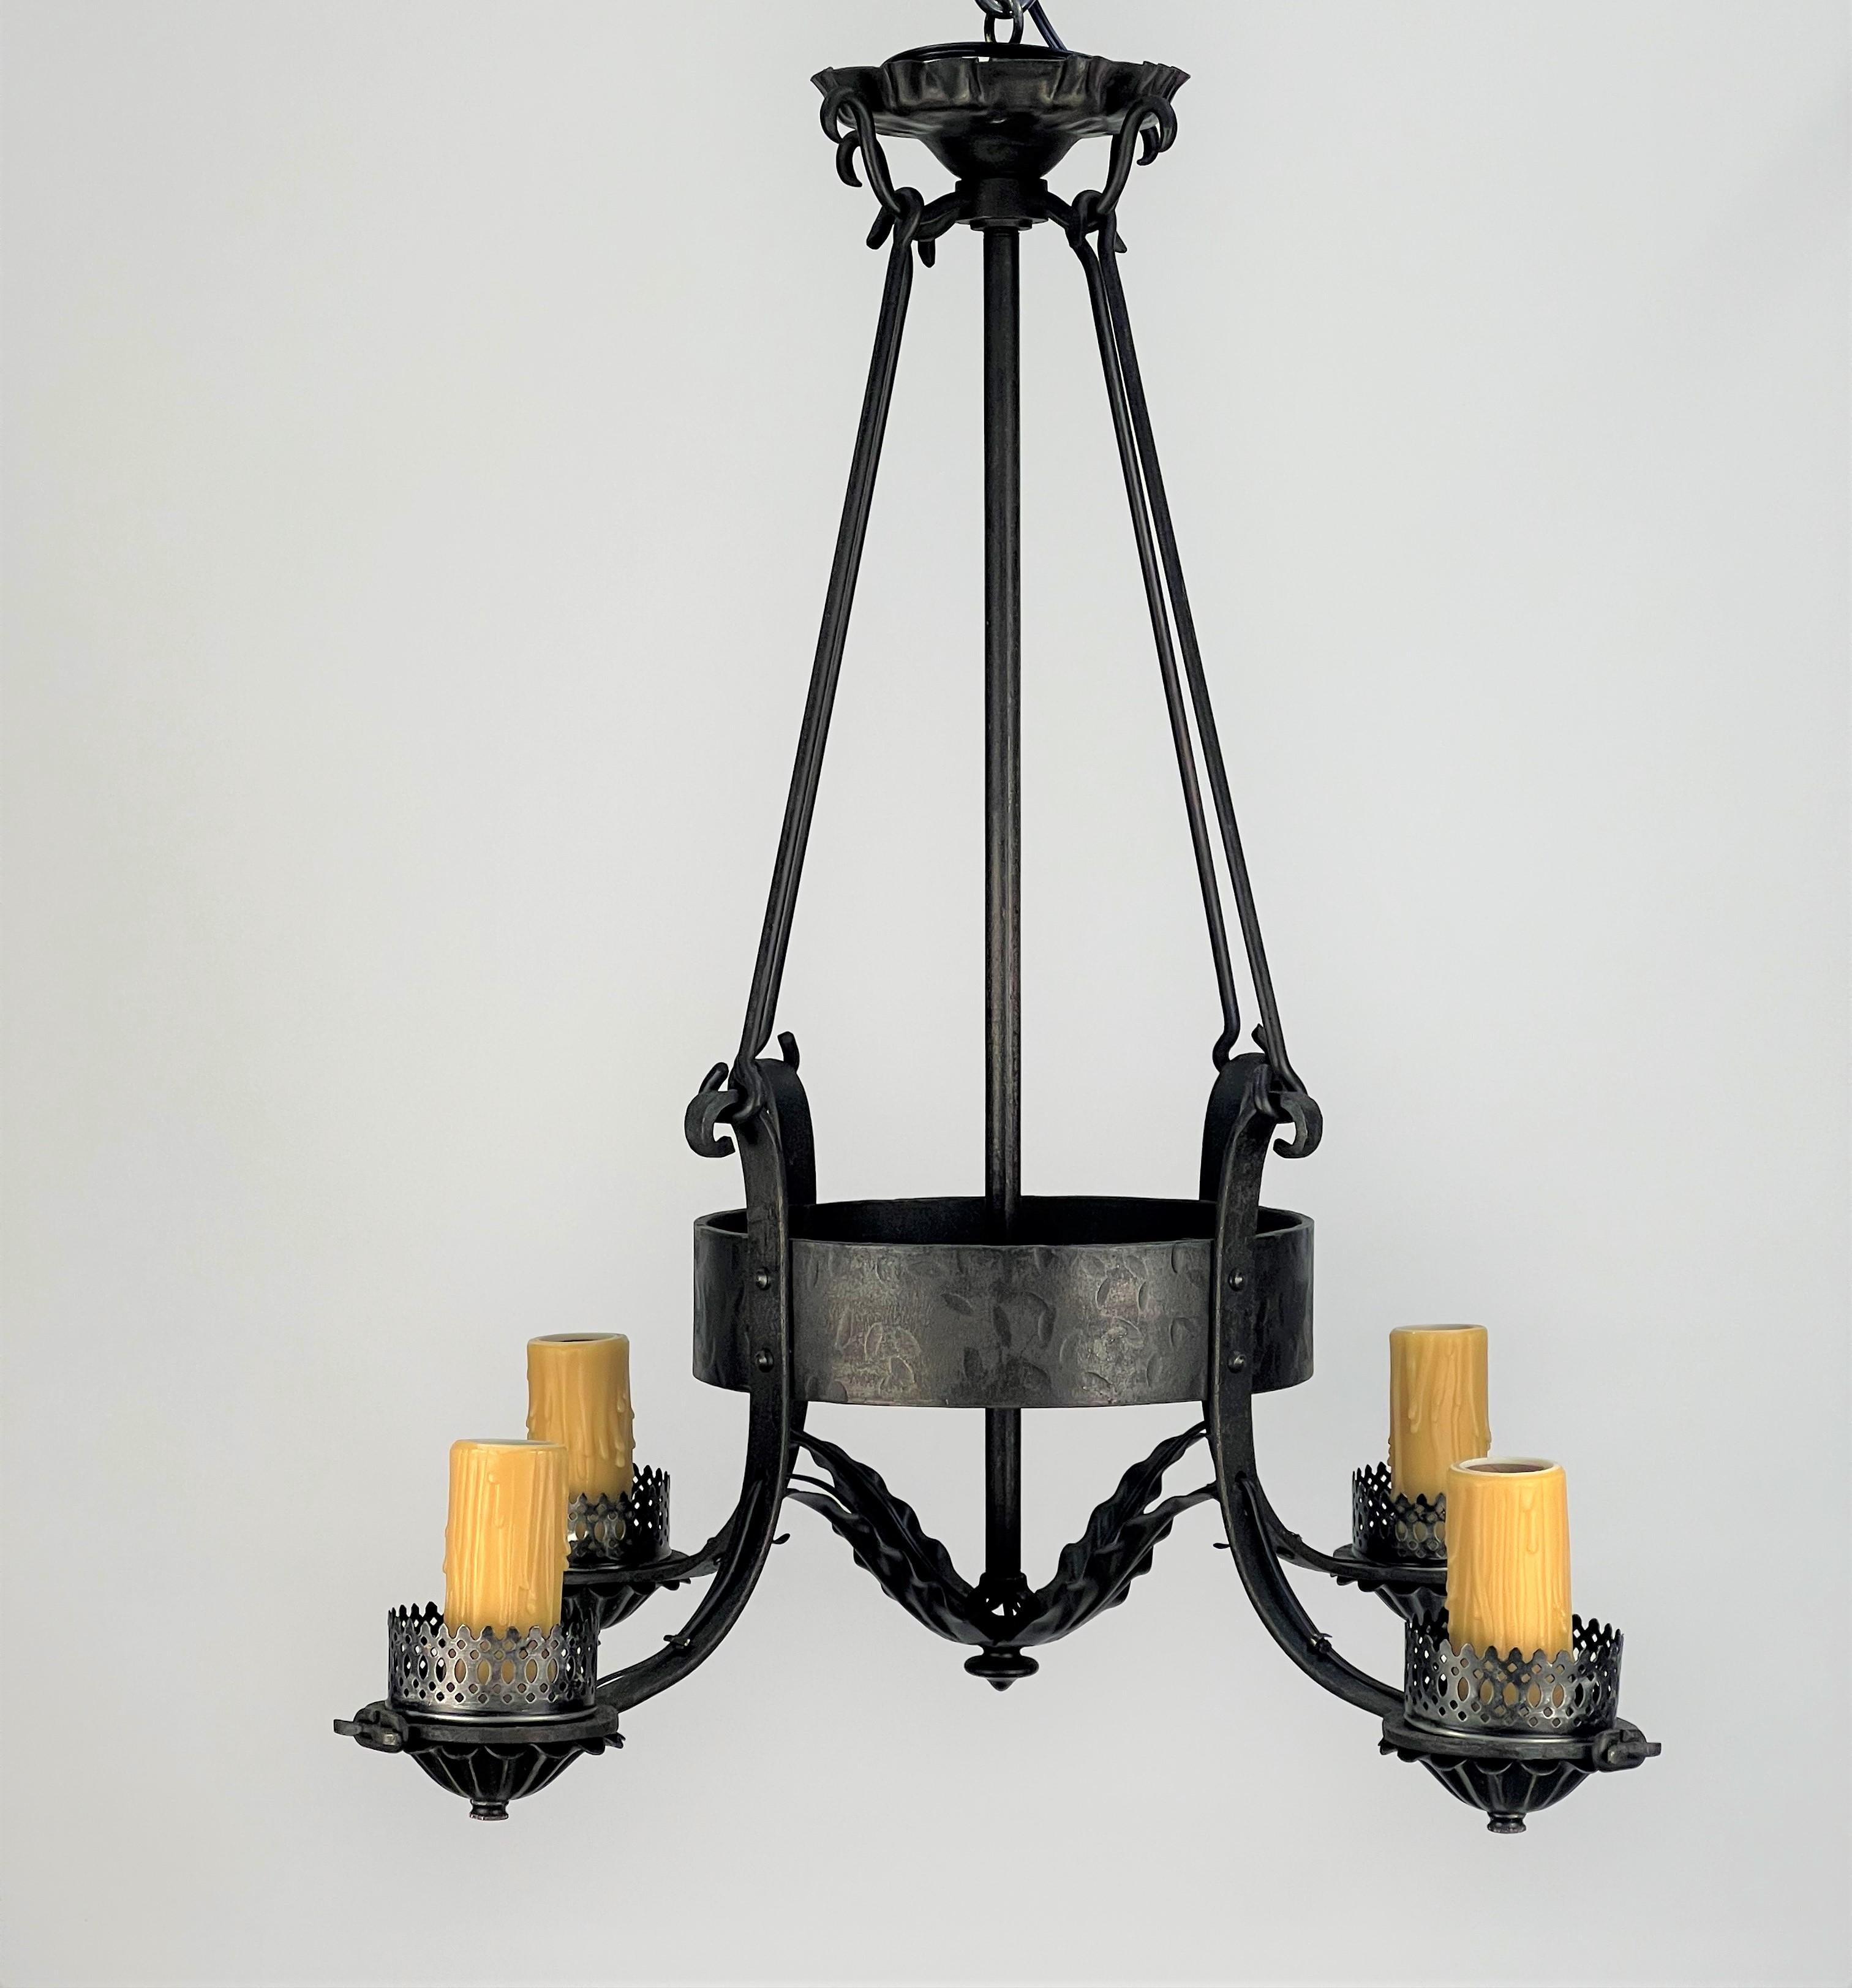 A rustic 1920's American wrought iron chandelier featuring four candle base sockets with faux beeswax drip candle sleeves. Each of the candles are attached to an arm featuring a reticulated (pierced) gallery on top and a shell shaped cup underneath